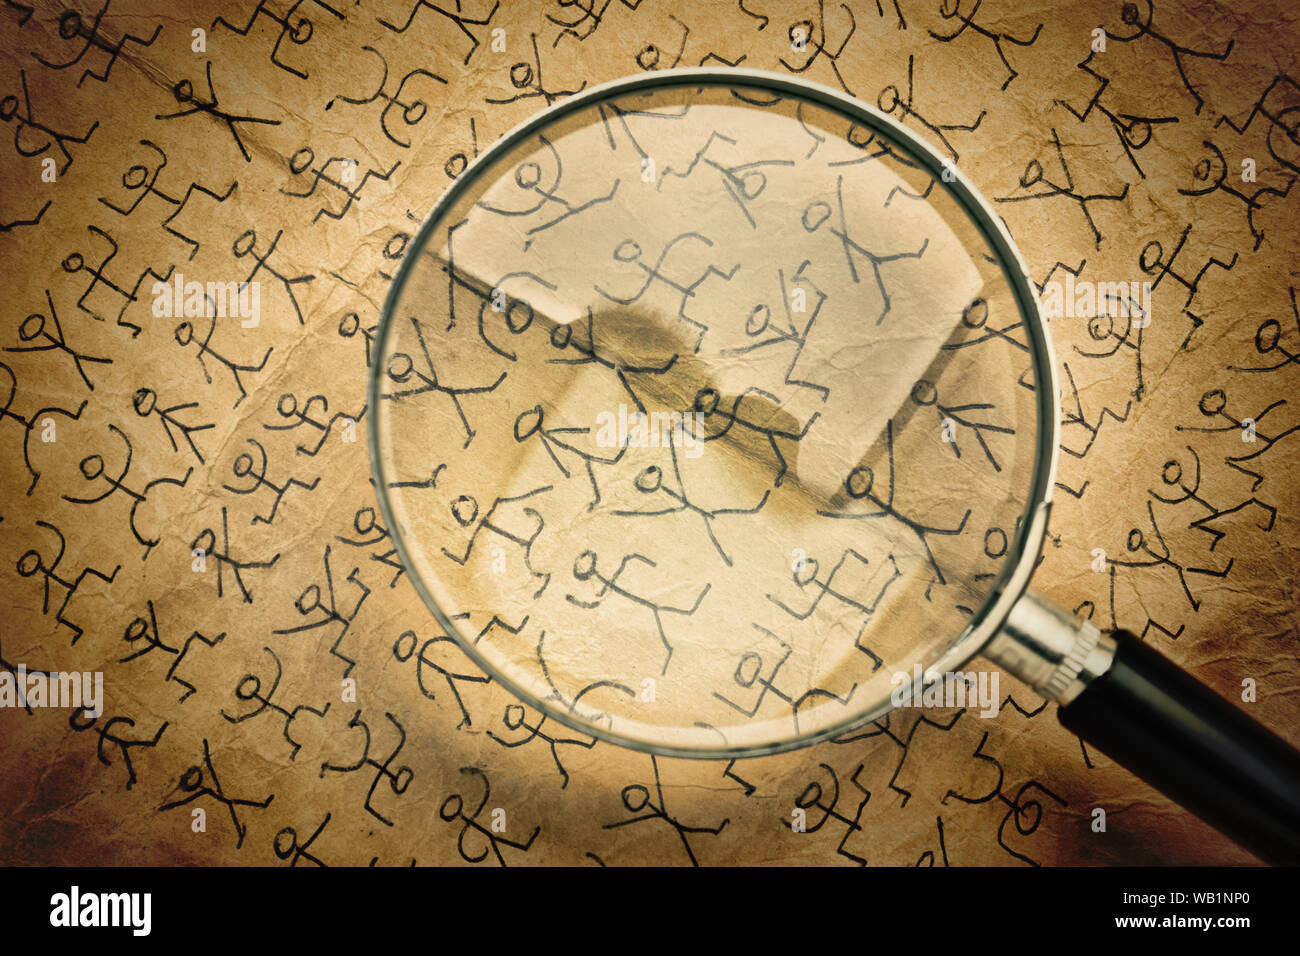 Magnifying glass and secret code dancing men Stock Photo - Alamy